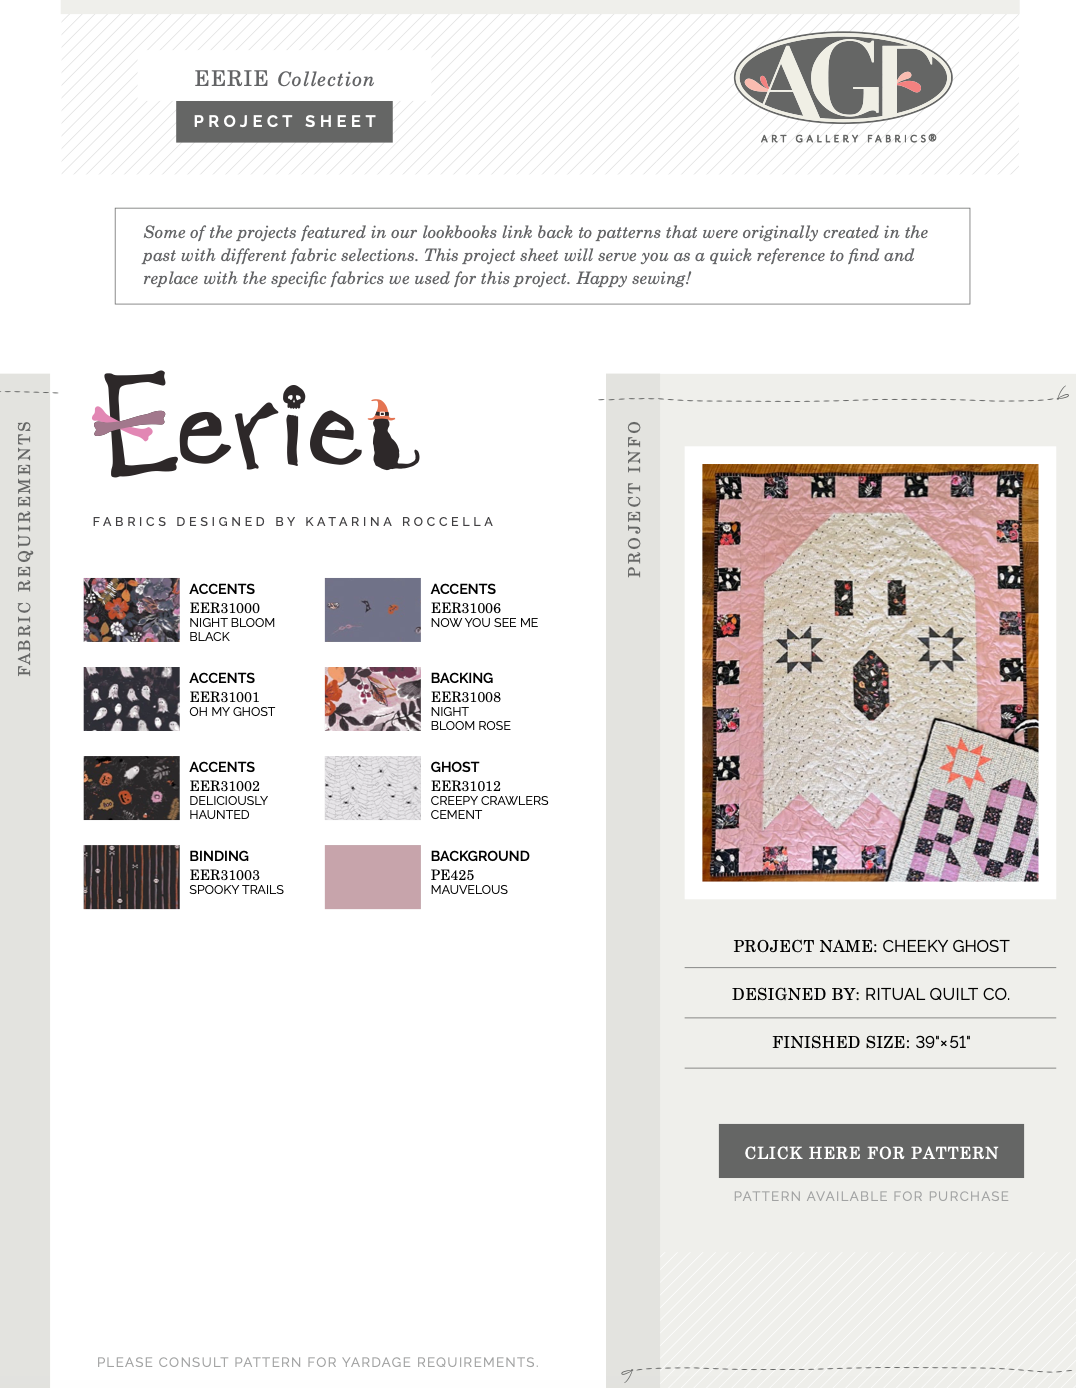 Eerie by Katarina Roccella - Cheeky Ghost Quilt Kit